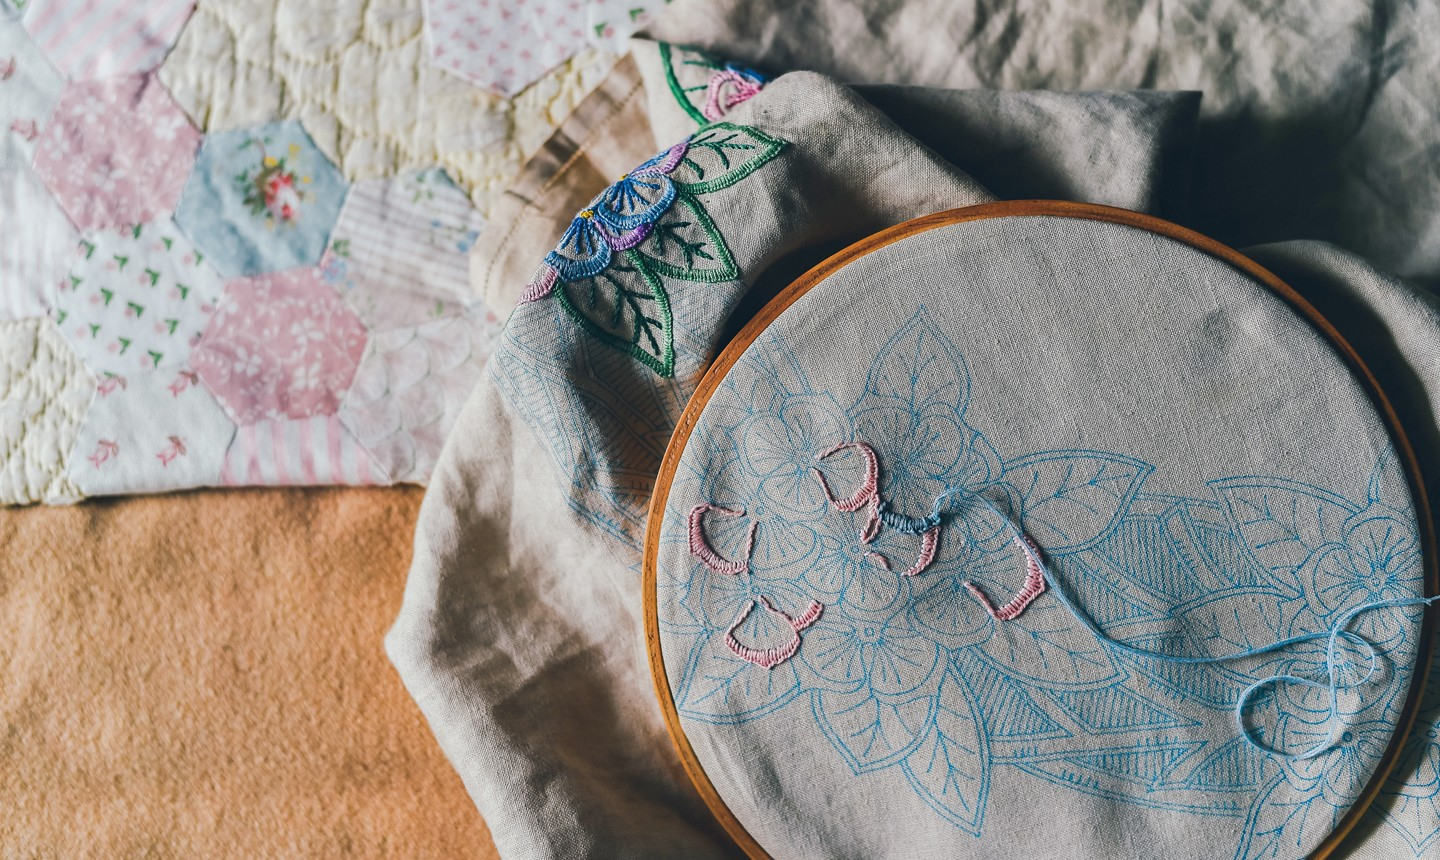 Paper Embroidery Patterns 5 Simple Ways To Transfer Embroidery Designs